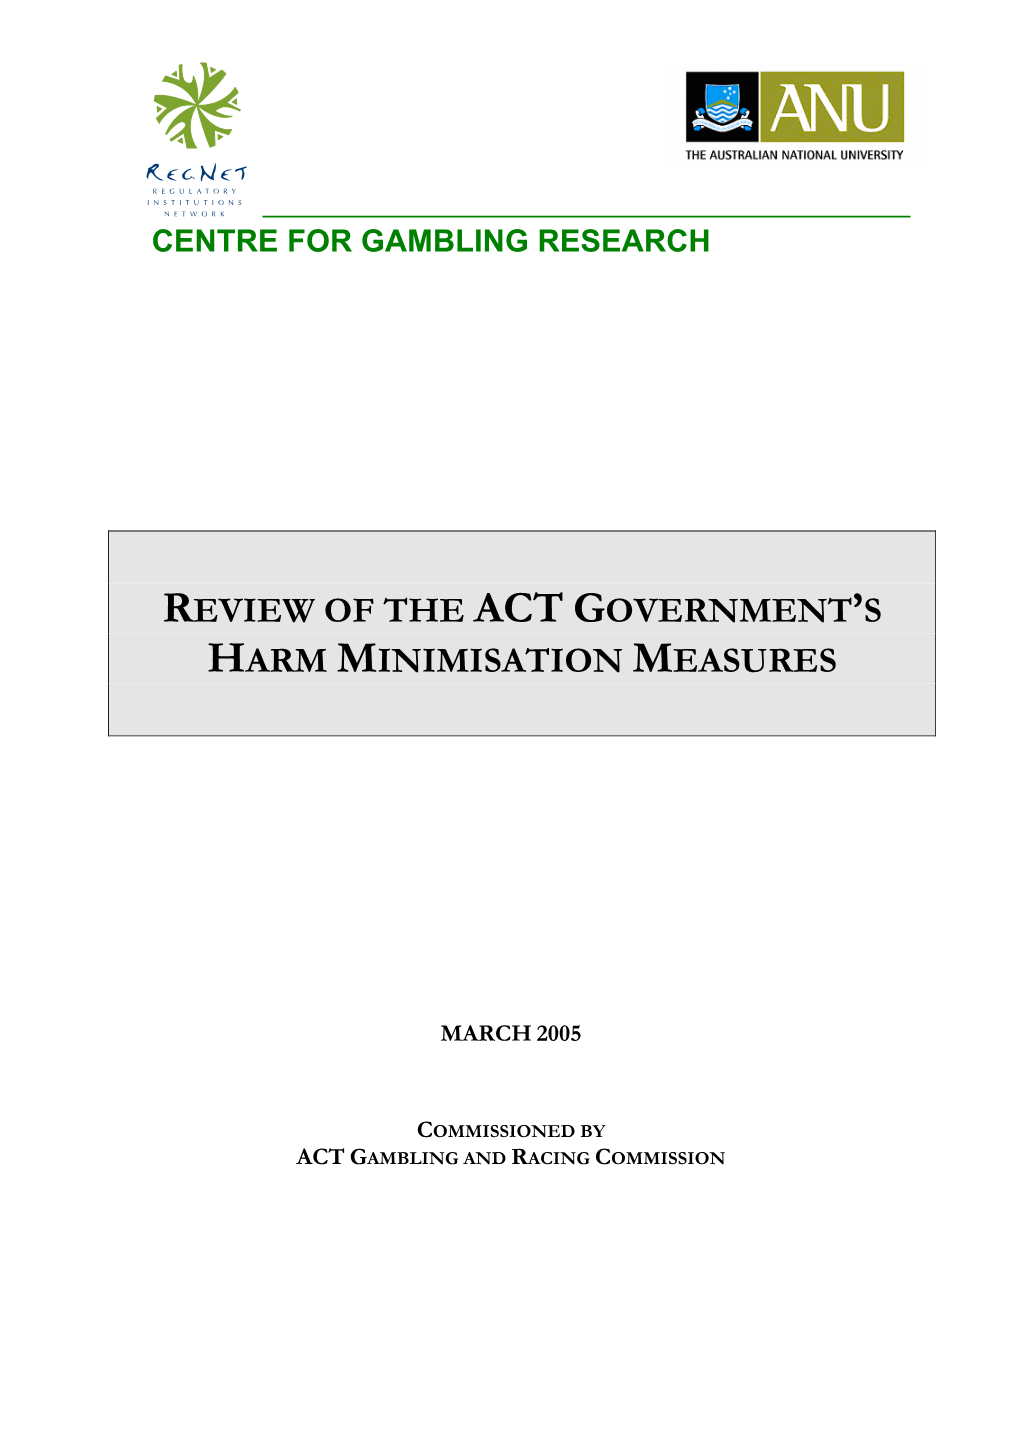 Centre for Gambling Research Review of the Act Government's Harm